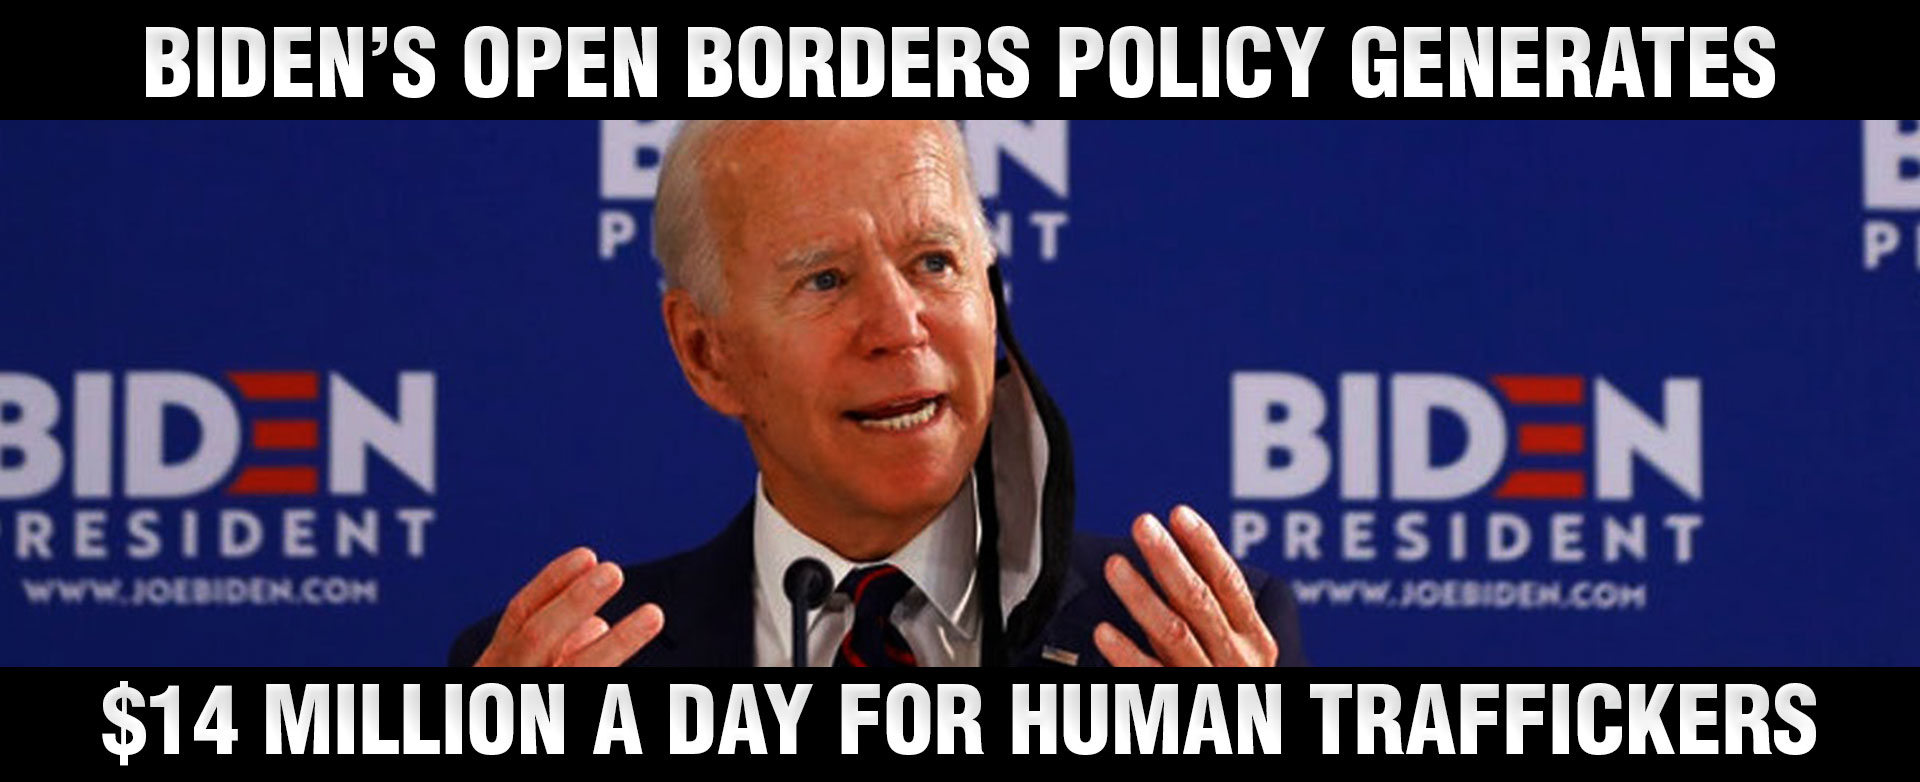 Biden’s Open Borders Policy Generates 14 Million a DAY for Human